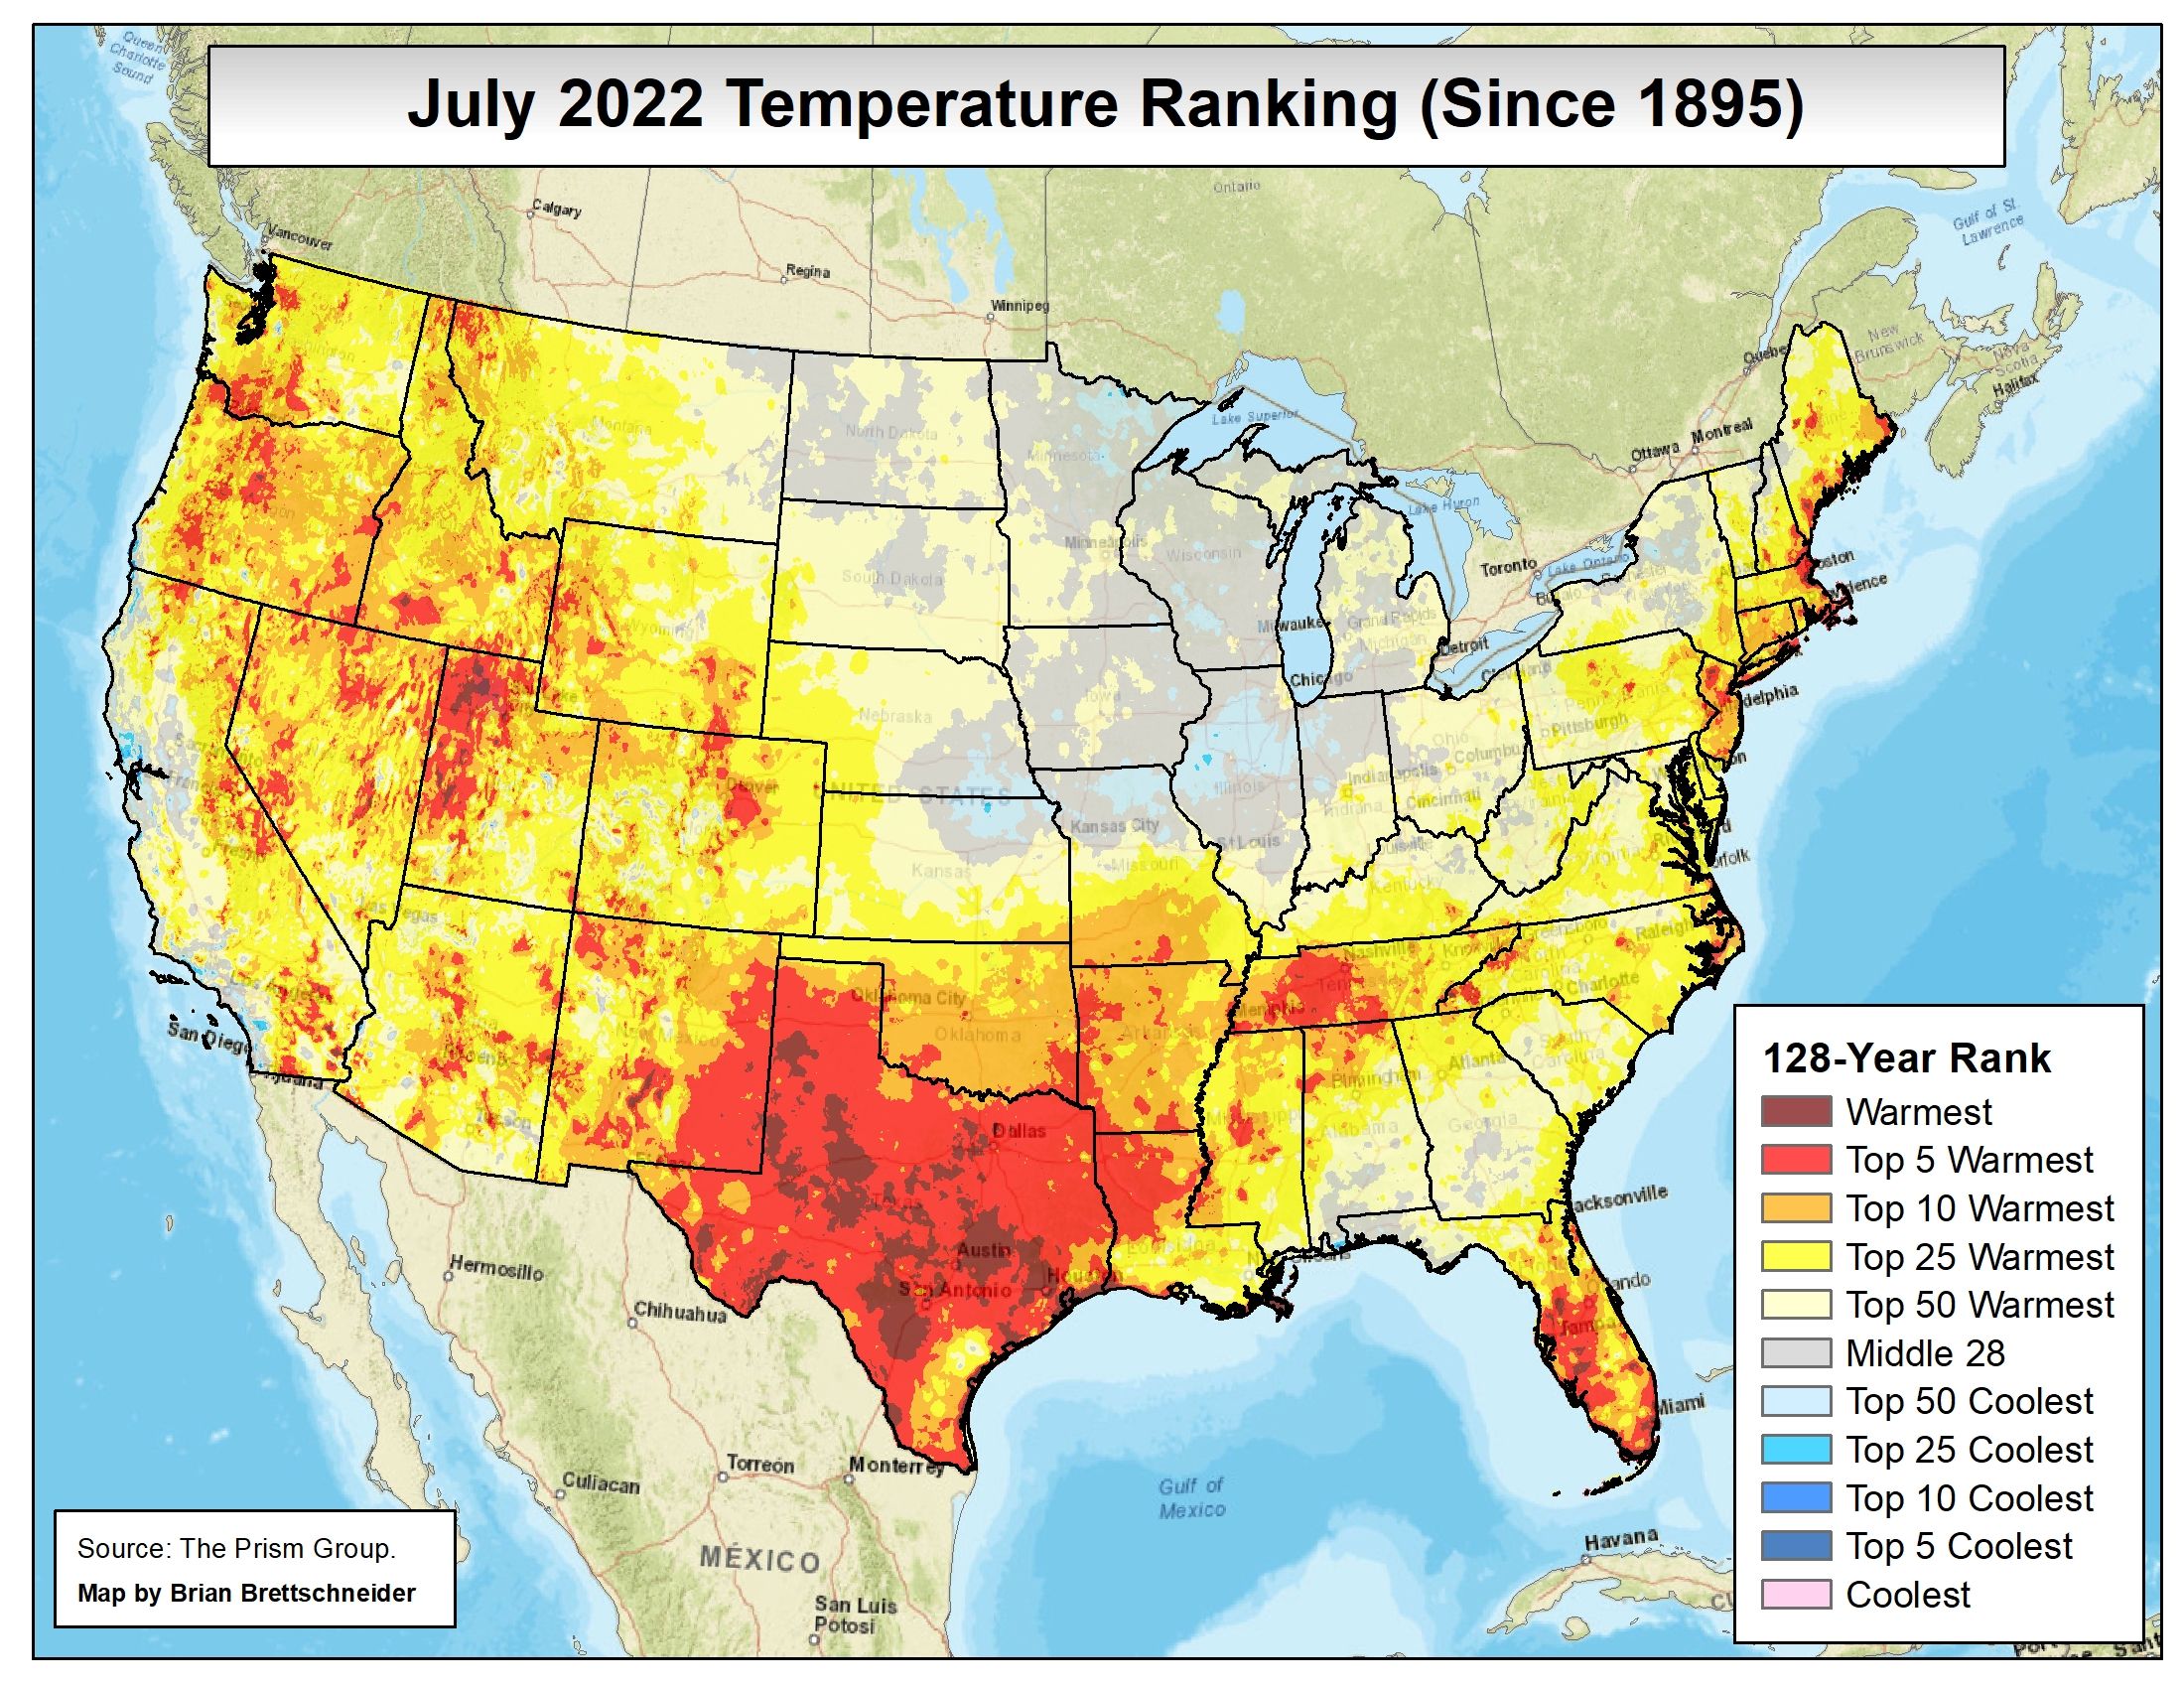 July 2022 temperature rankings since 1895 for the entire continental United States.